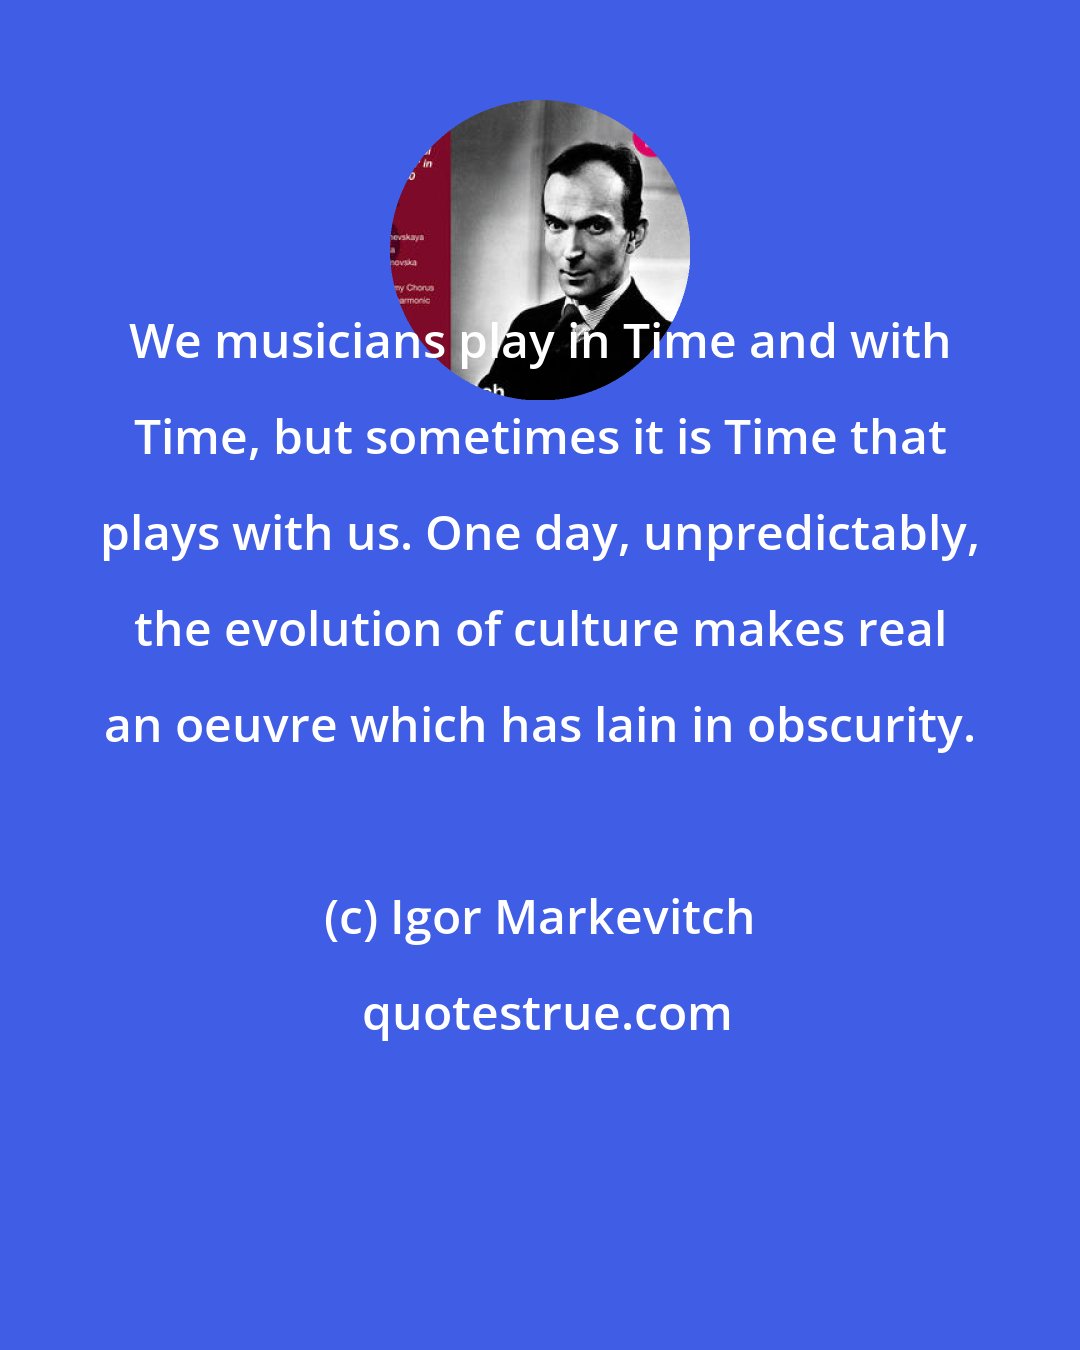 Igor Markevitch: We musicians play in Time and with Time, but sometimes it is Time that plays with us. One day, unpredictably, the evolution of culture makes real an oeuvre which has lain in obscurity.